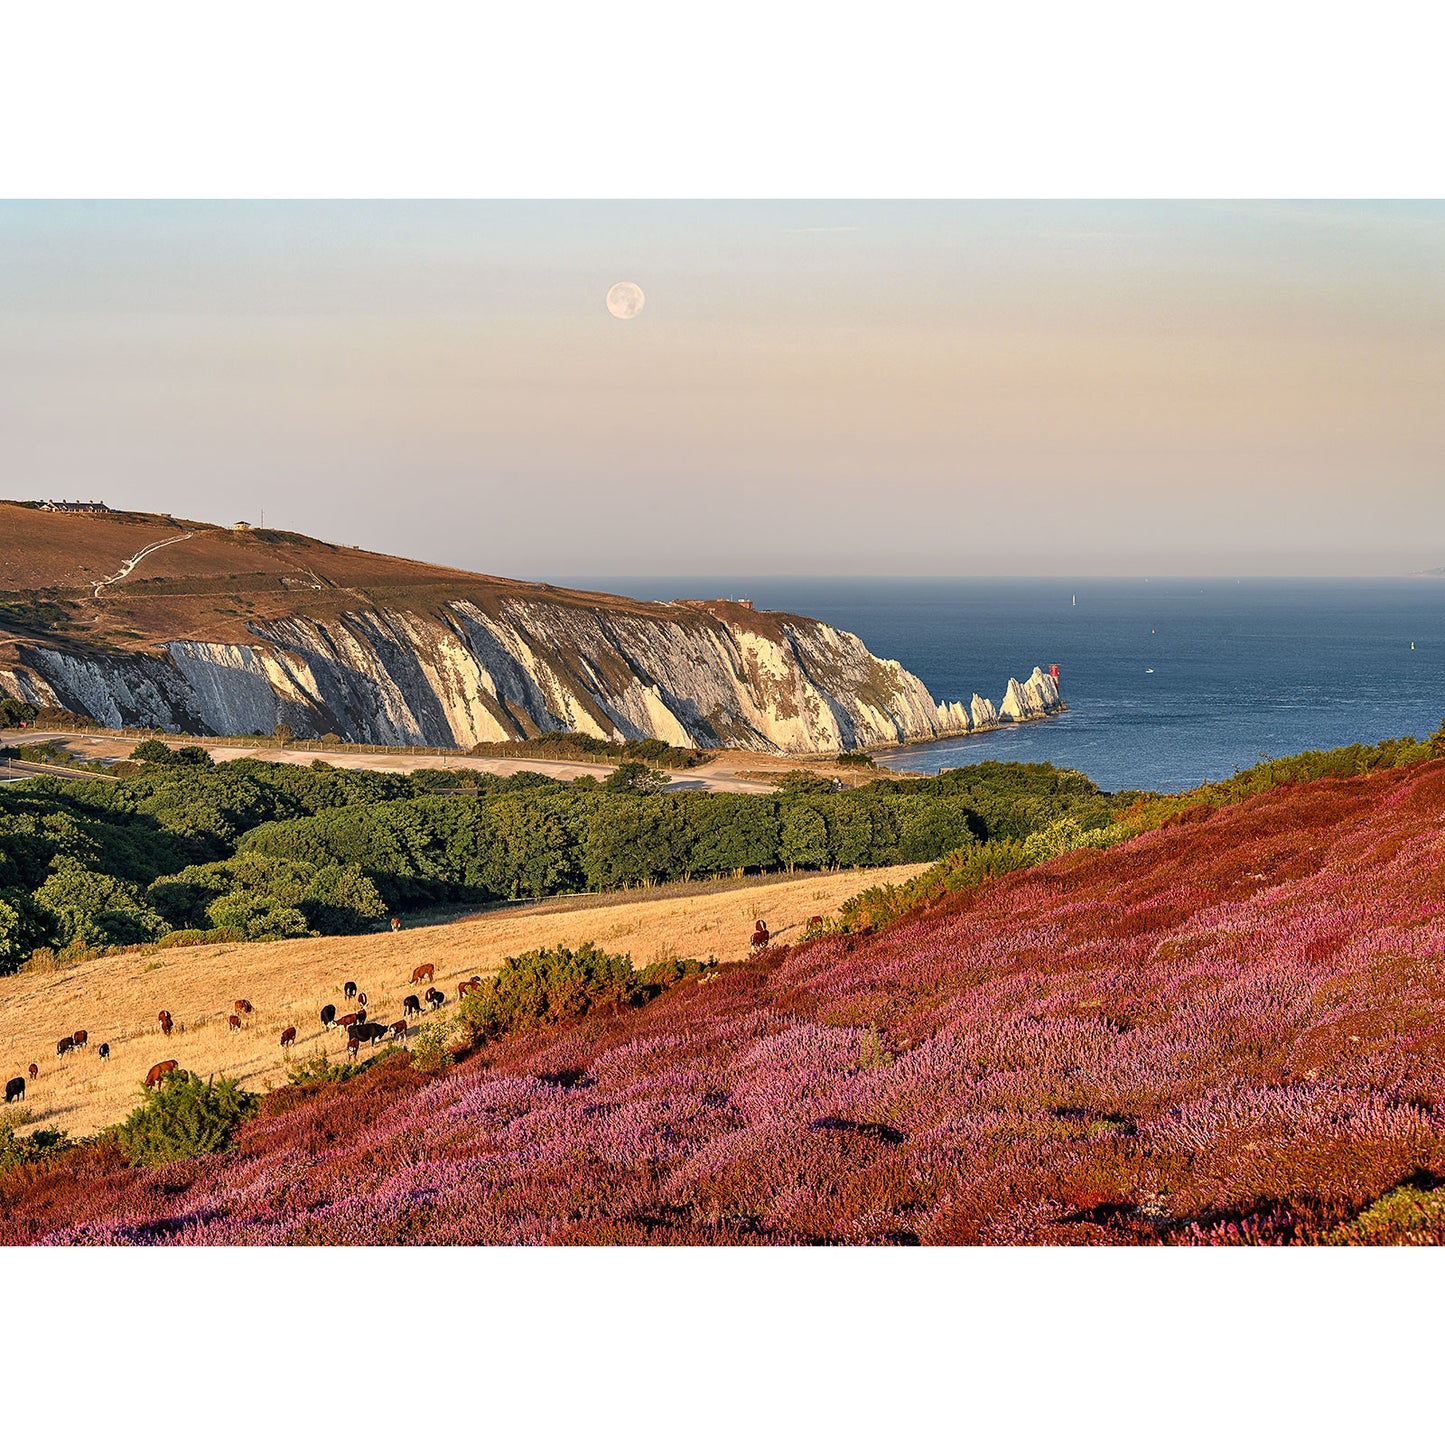 Full Moonset over Headon Warren rising over a coastal landscape with chalk cliffs, heather fields, and grazing cattle on the Isle of Wight by Available Light Photography.